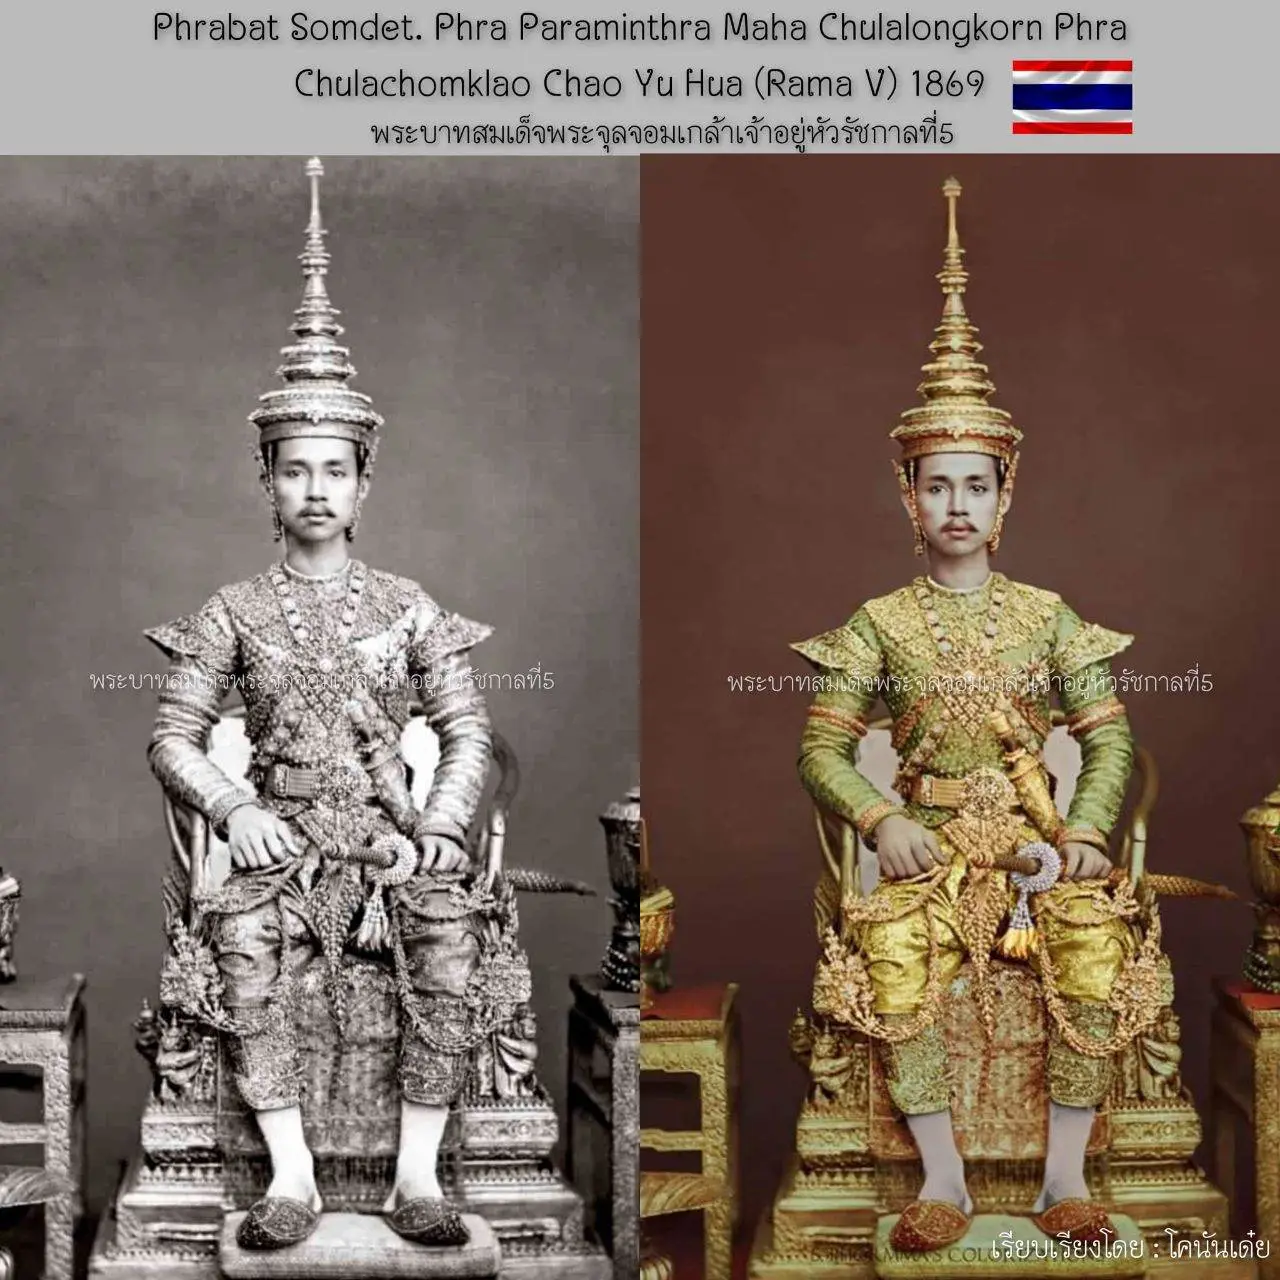 THAILAND 🇹🇭 | Colorized photo of Siam history